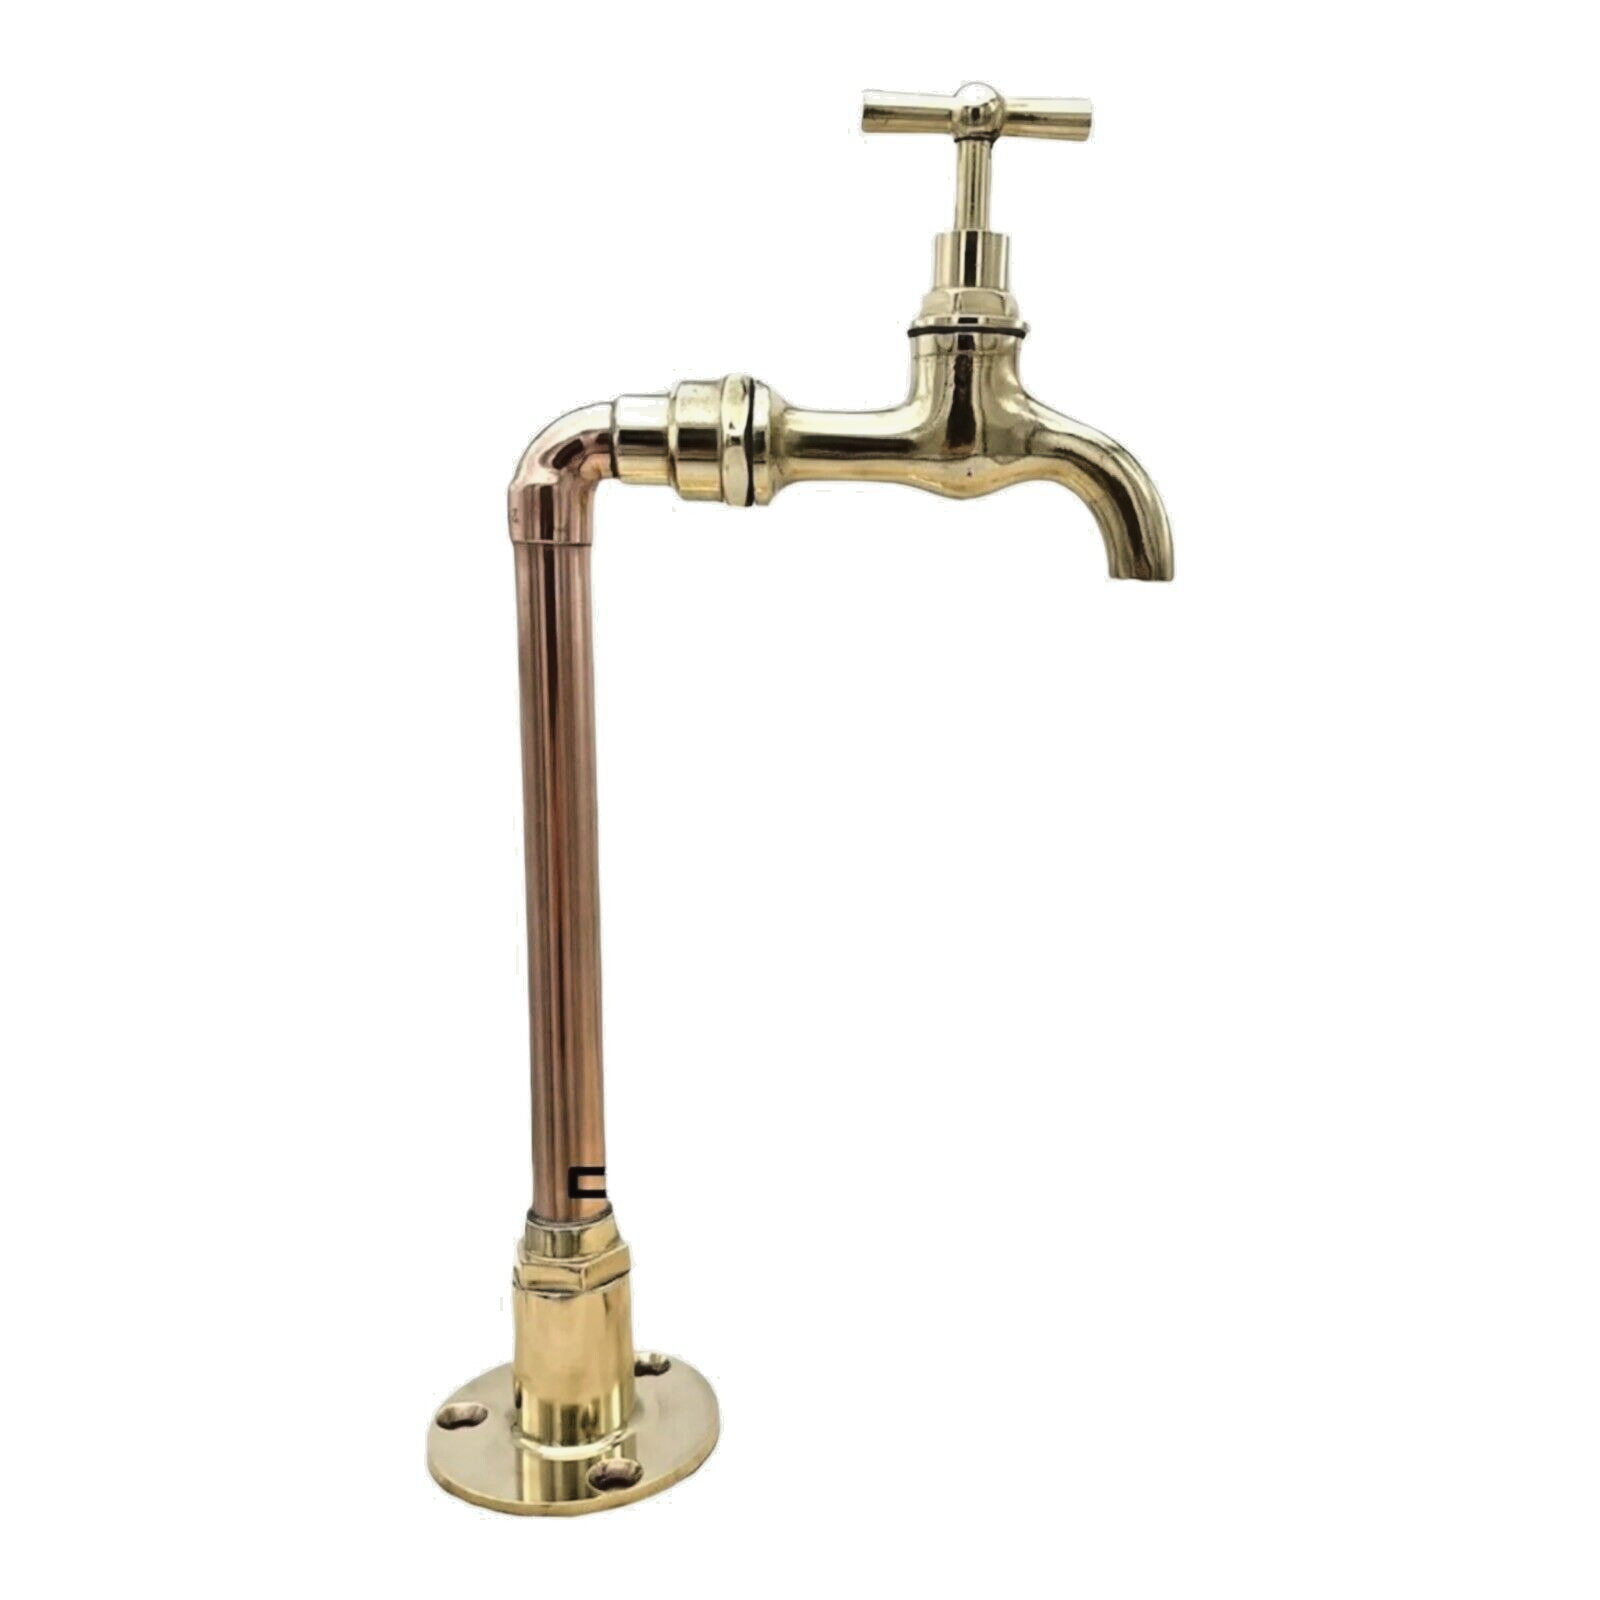 single copper and brass vintage style kitchen tap sold by All Things French Store